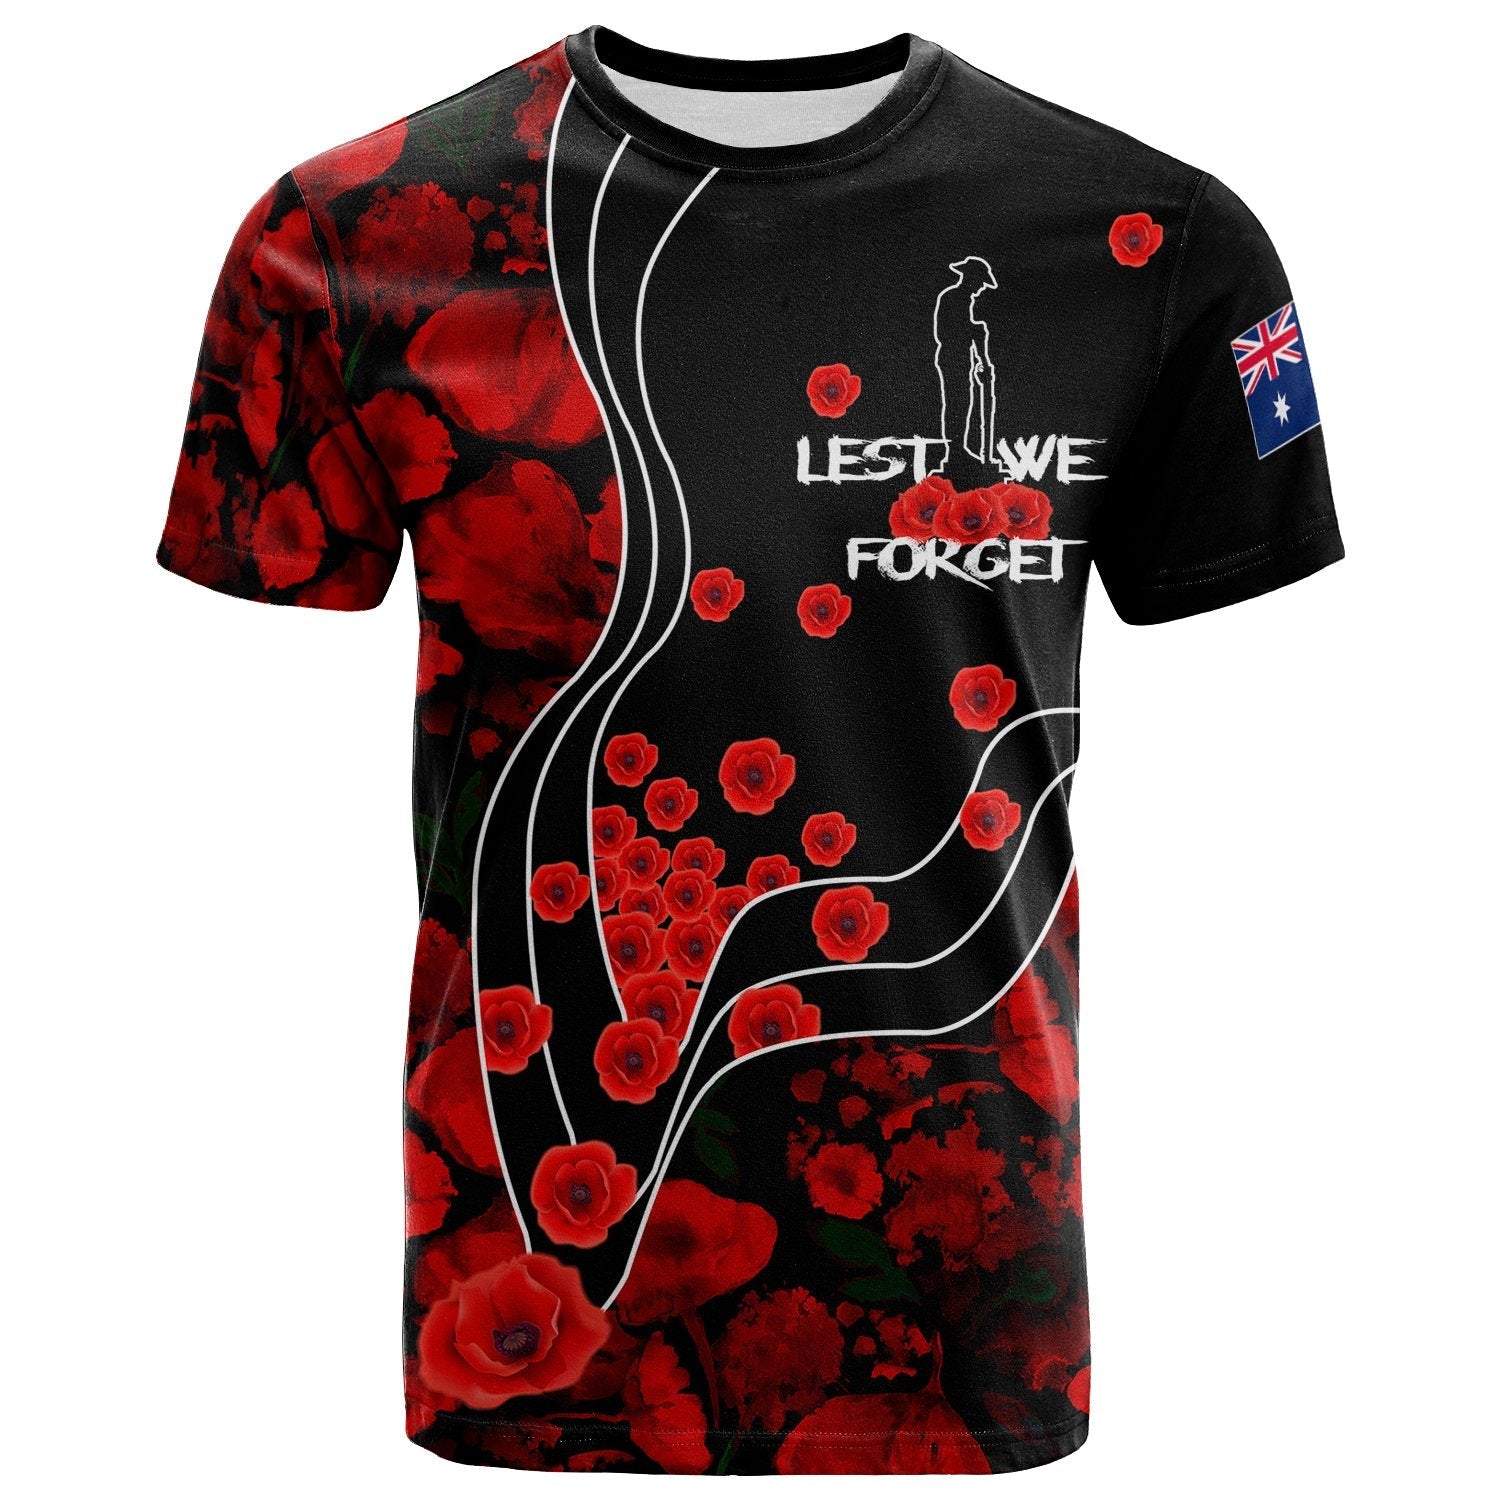 anzac-lest-we-forget-t-shirt-poppy-flowers